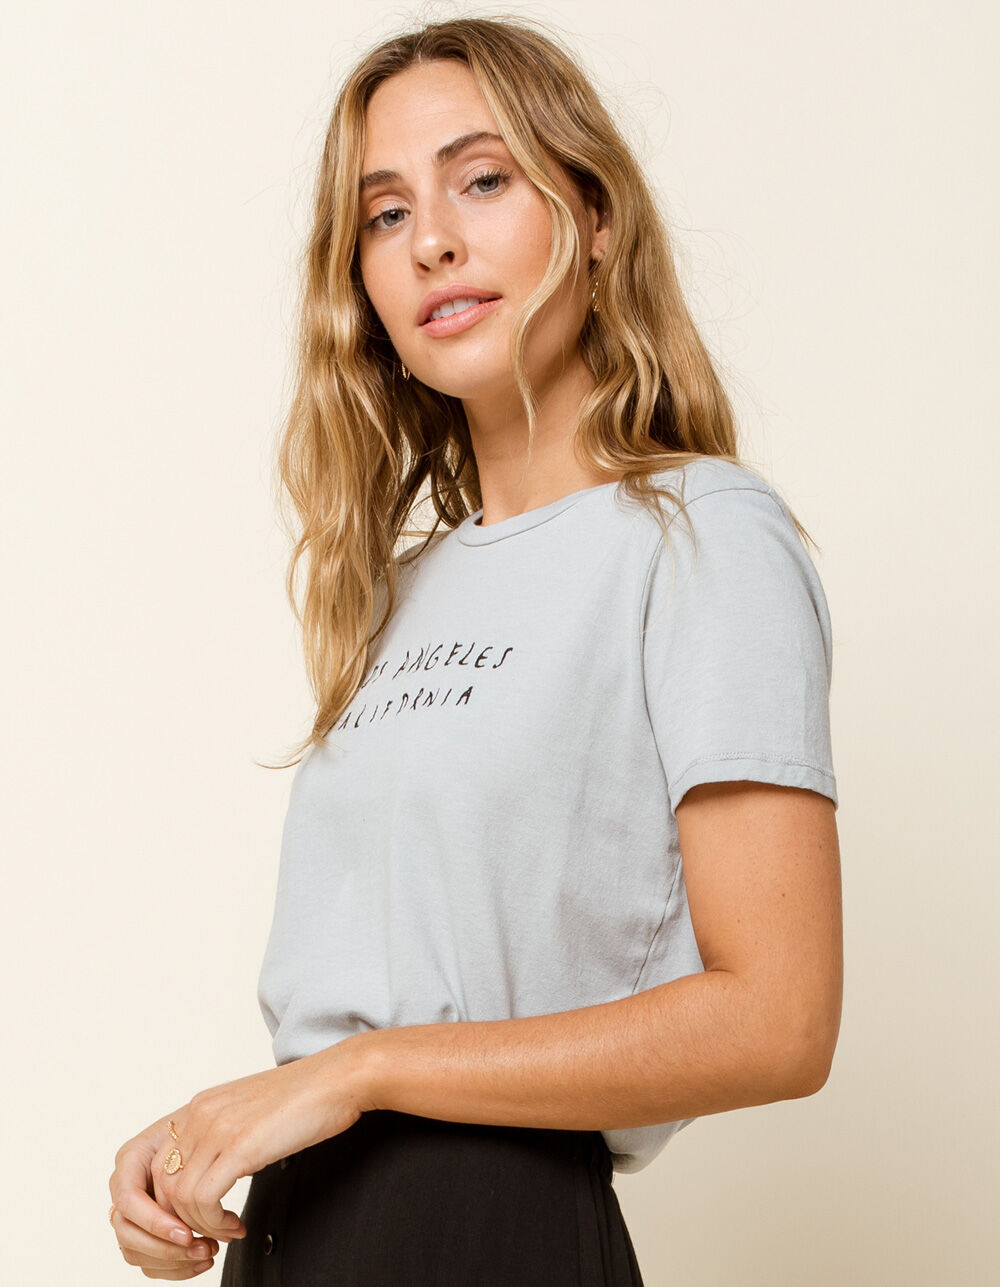 WEST OF MELROSE Los Angeles Womens Embroidered Tee - LIGHT BLUE | Tillys